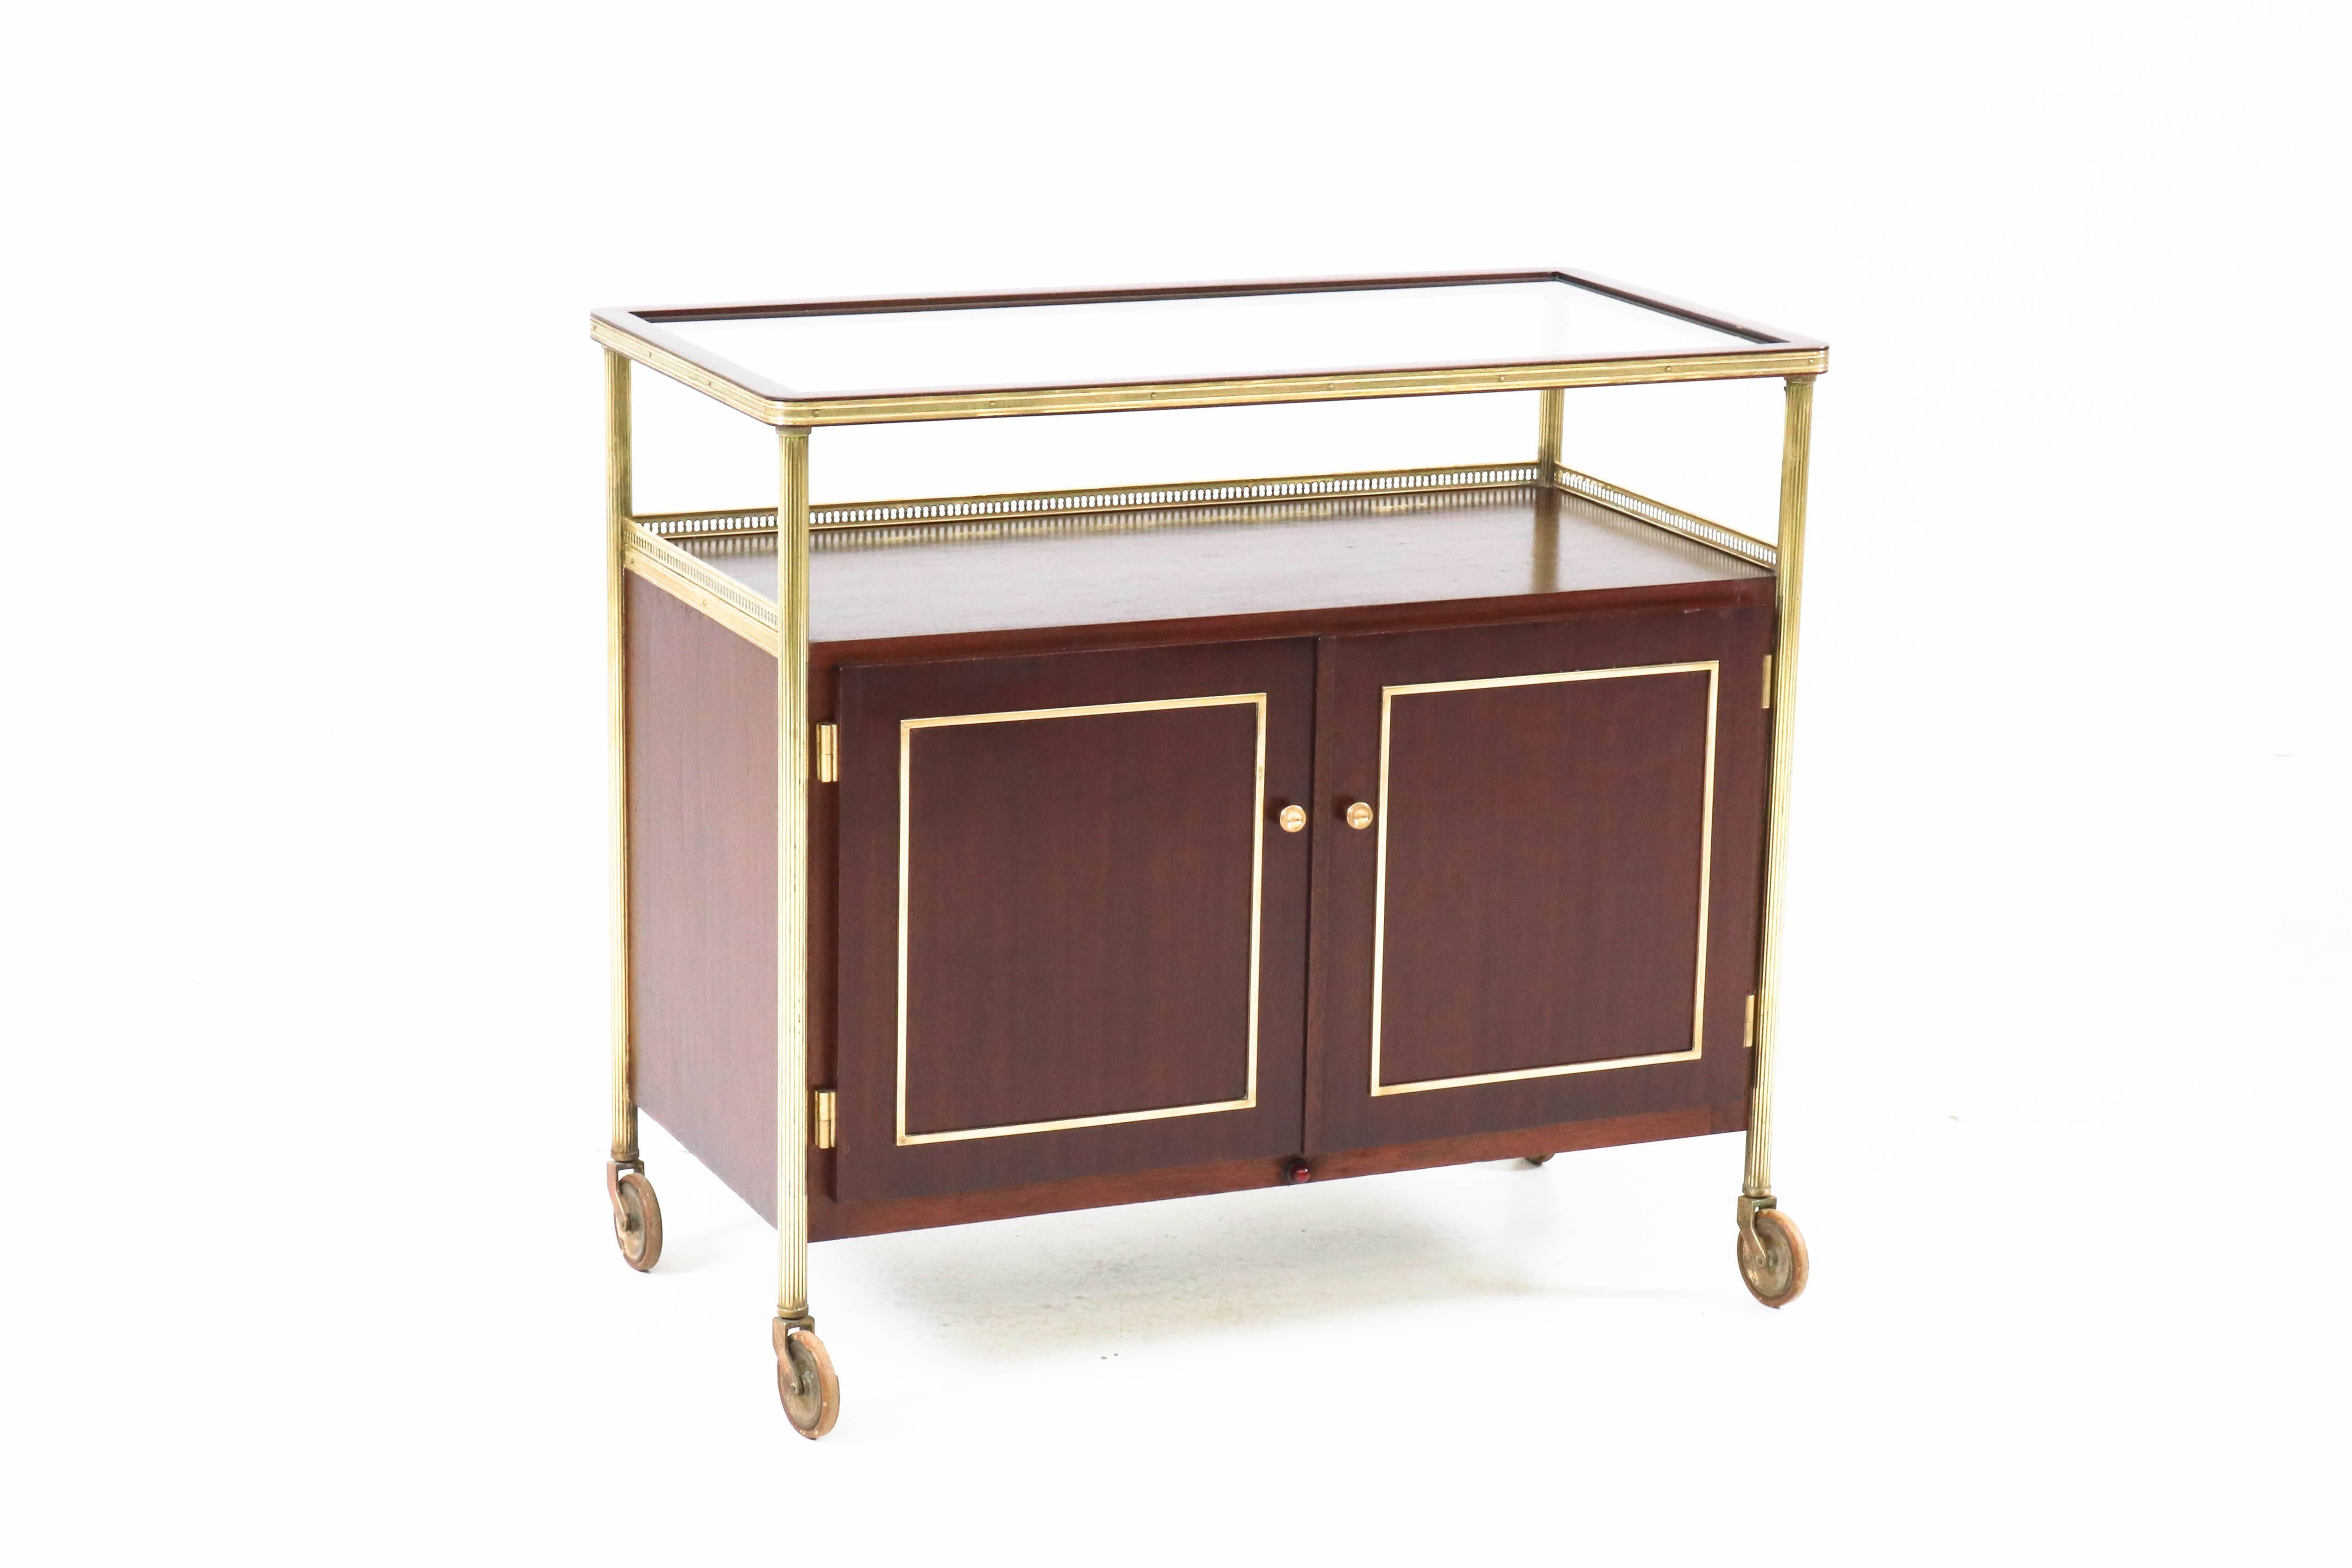 
Offered by Amsterdam Modernism:
Stunning mahogany / brass French Hollywood Regency bar cart, 1950s.
Elegant design.
With integrated cooling.
In good condition with minor wear consistent with age and use,
preserving a beautiful patina.